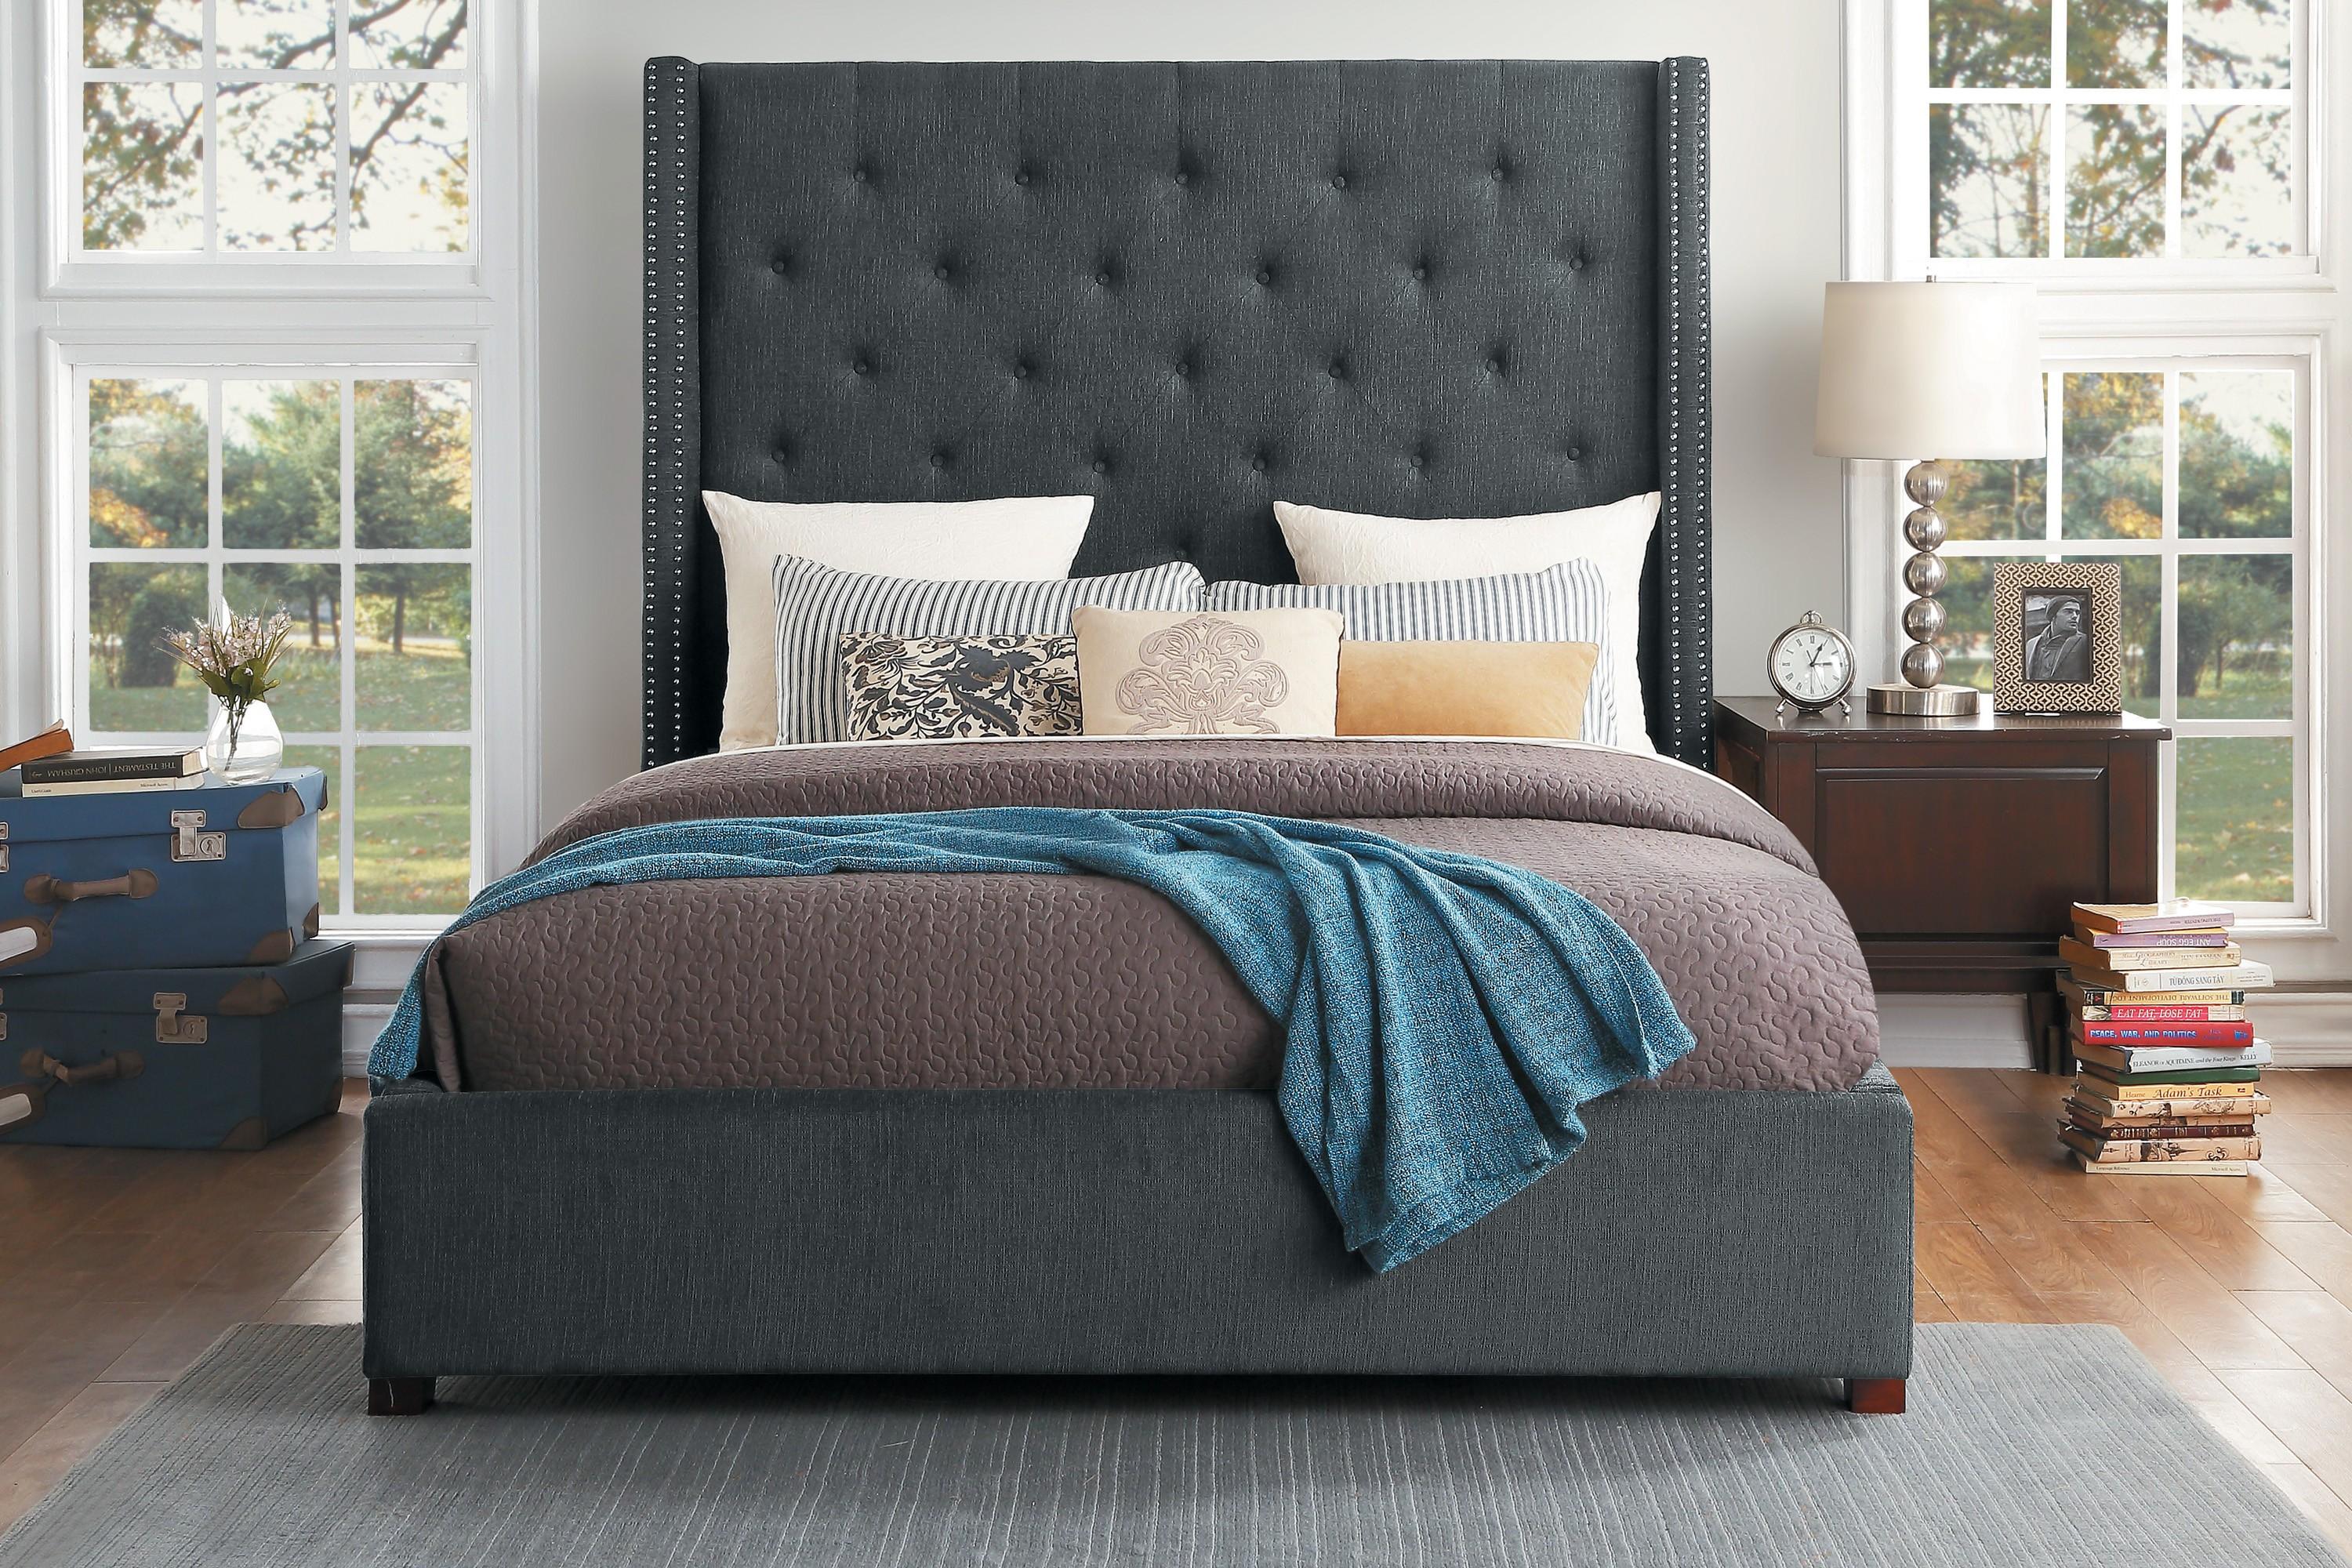 

    
5877GY-1* Modern Dark Gray Solid Wood Queen Bed Homelegance 5877GY-1* Fairborn
